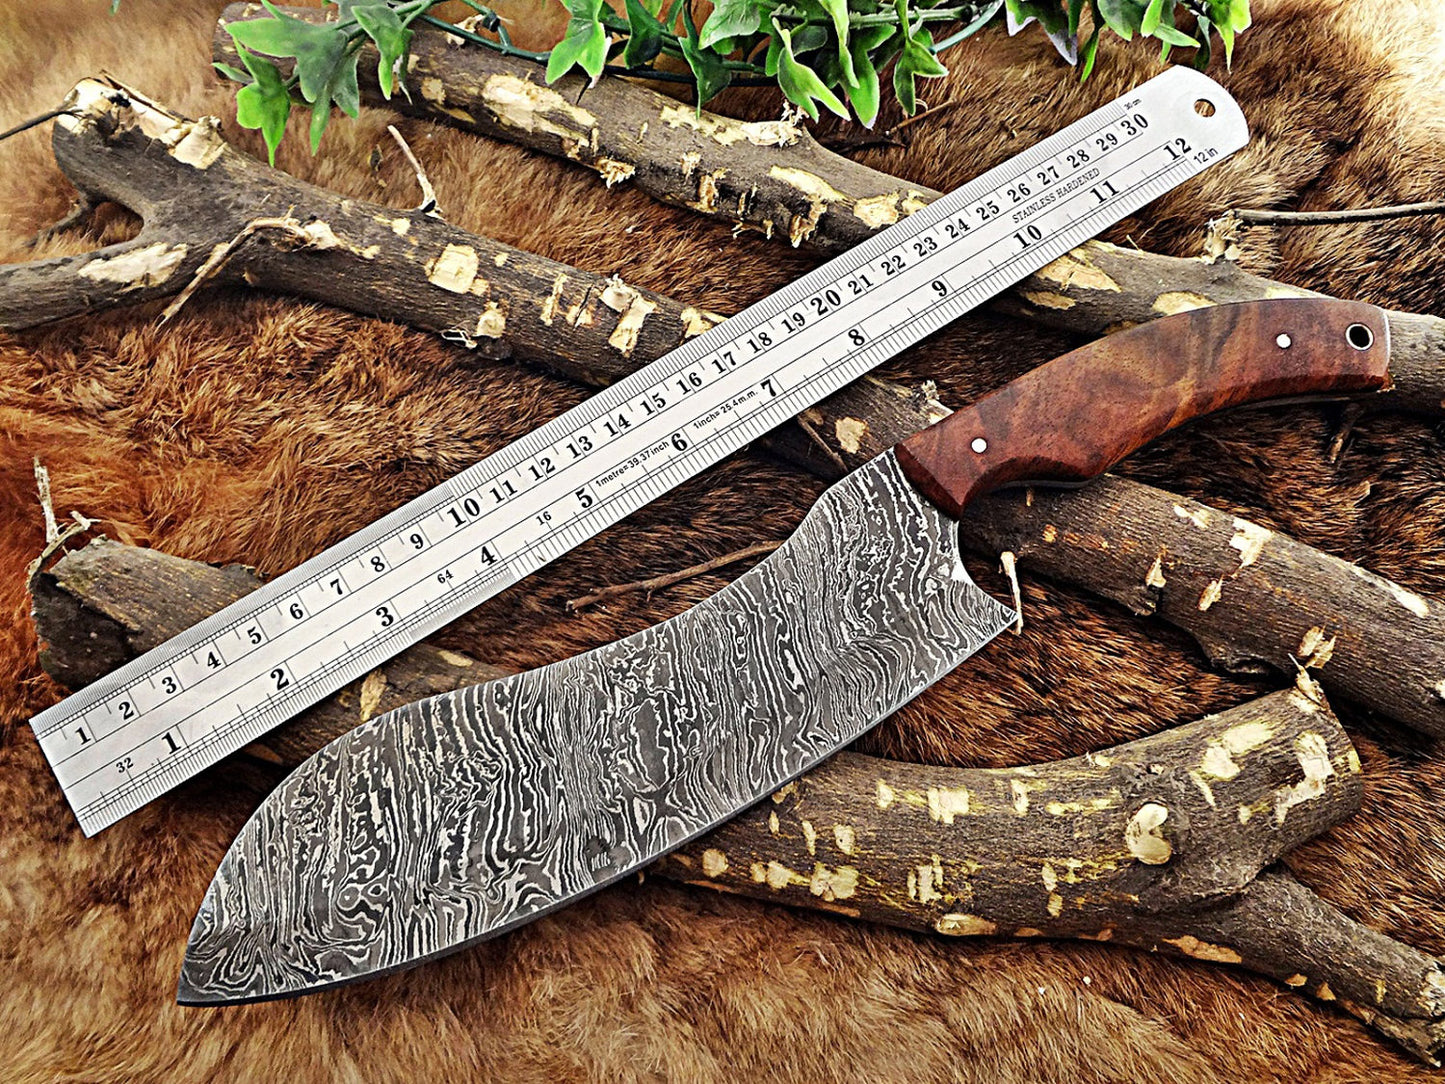 13 Inches long custom made Damascus steel full tang blade chopper chef Knife 7.5" long cutting edge Rose Wood scale with inserting hole